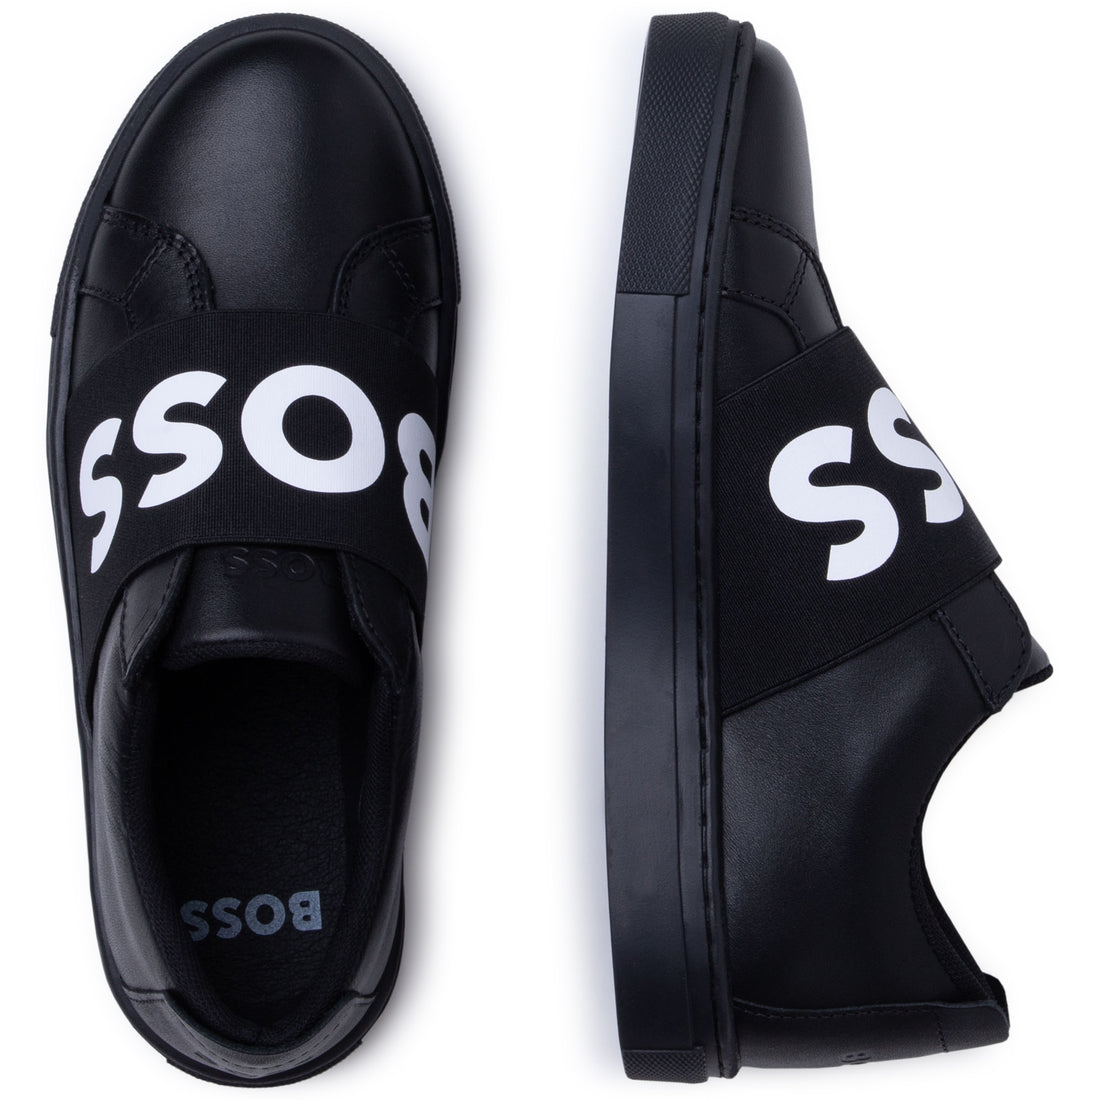 Boss Trainers Style: J29299